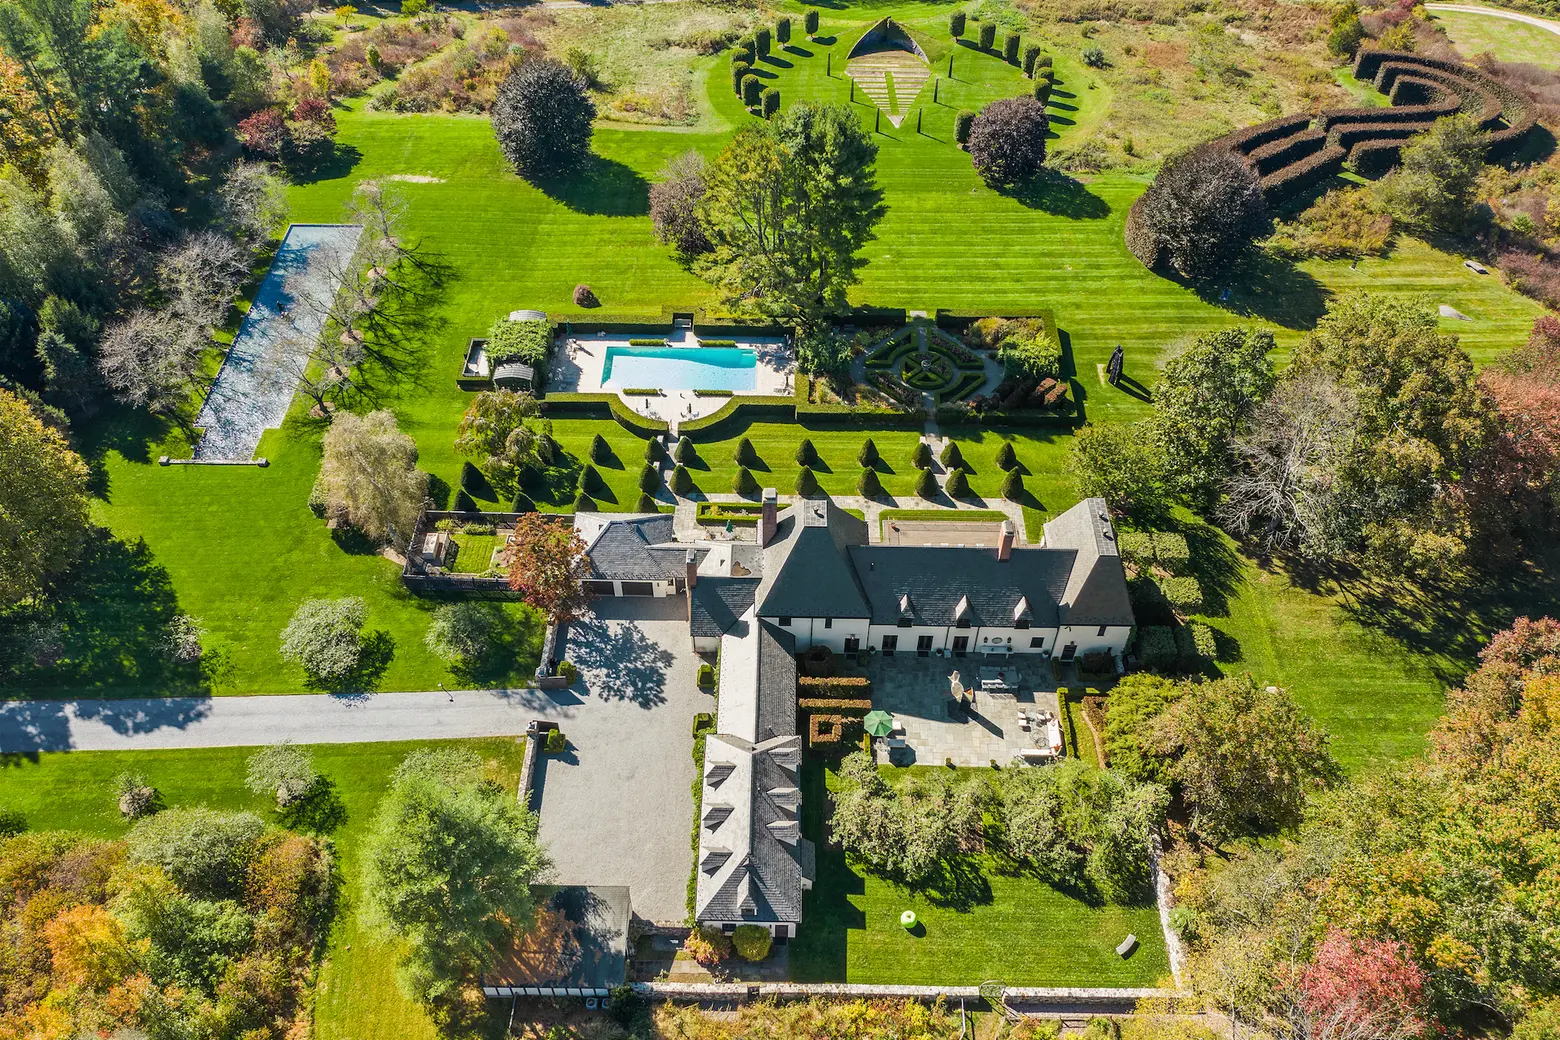 Broadway producers behind ‘Chicago’ list their showstopping Westchester estate for $13.2M